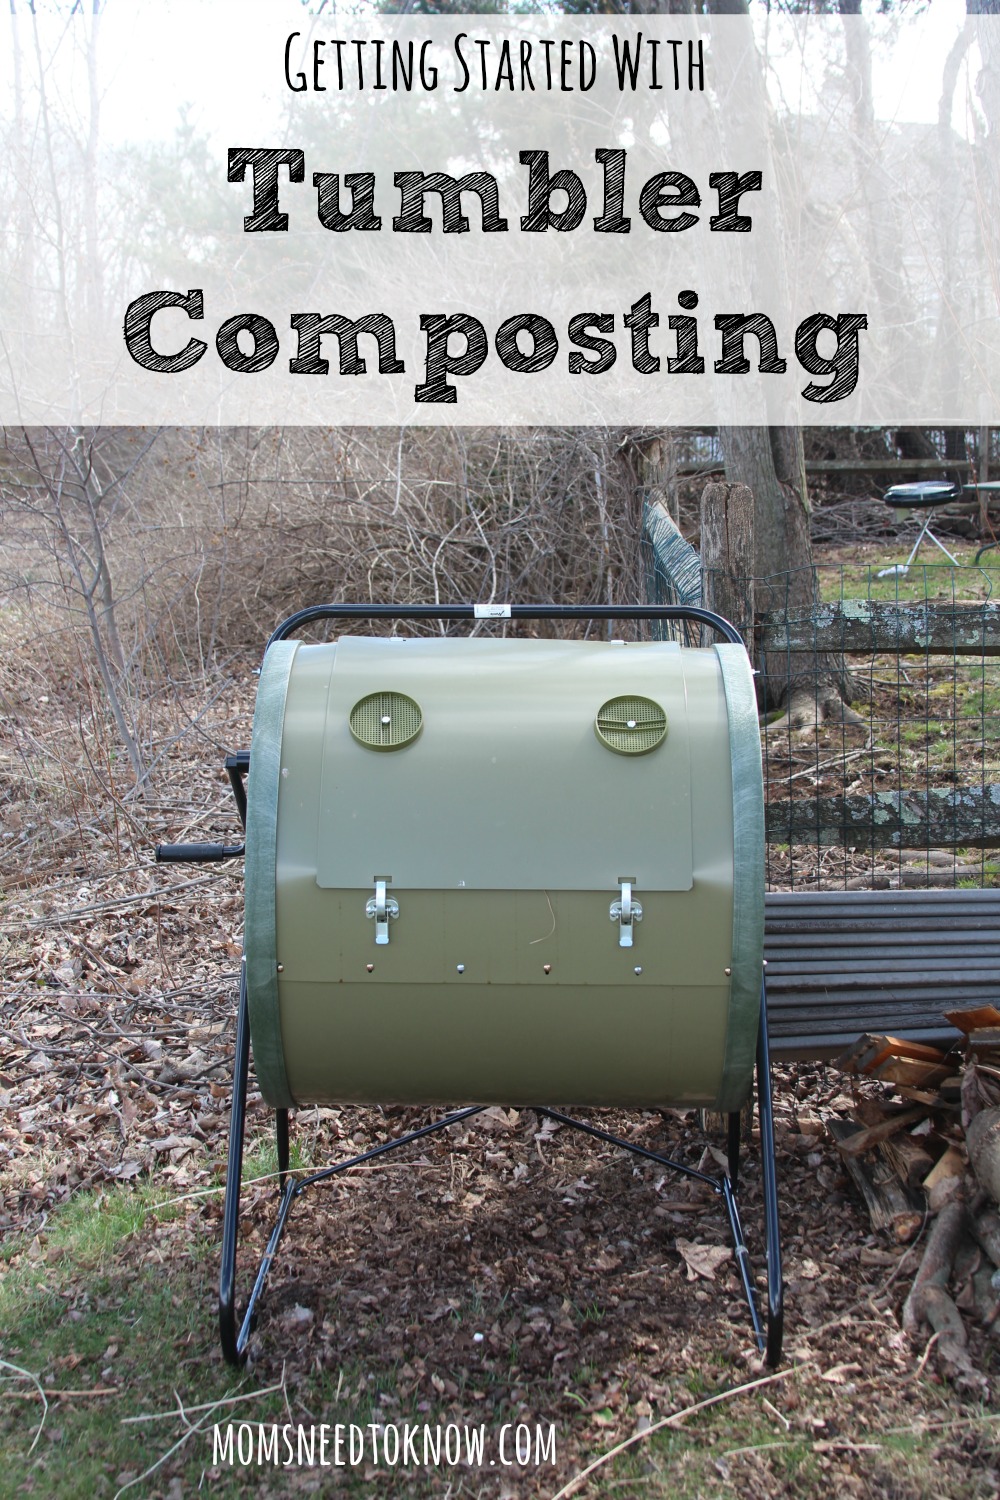 We all know how wonderful composting is and tumbler composting is a great way to do it! The people at Mantis sent me a ComposTumbler - here are my results